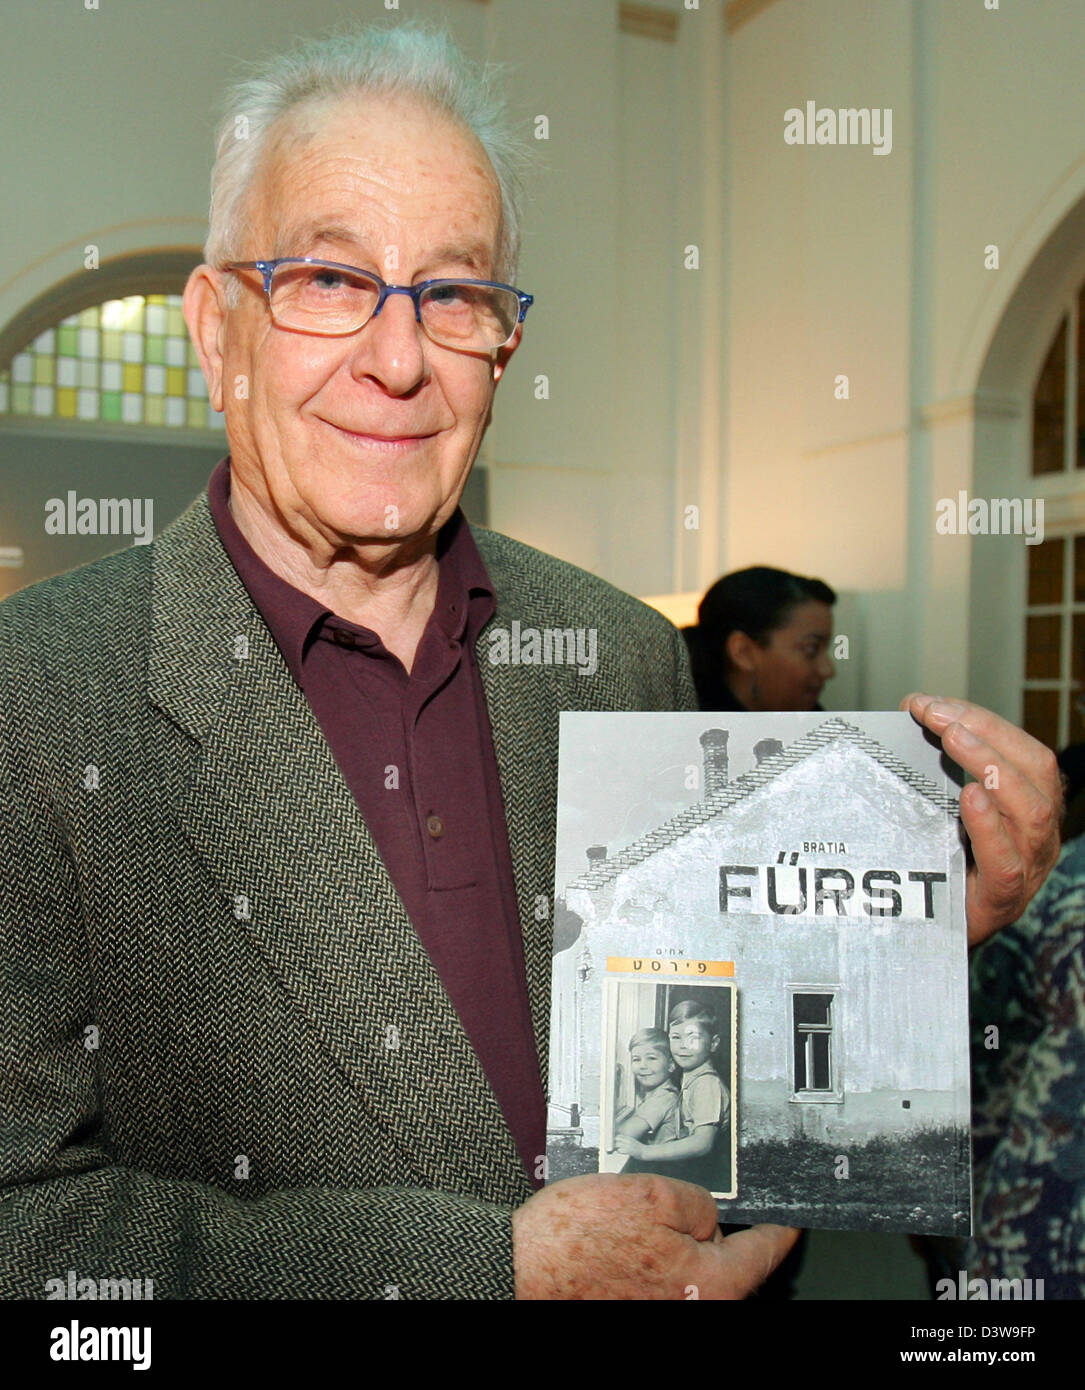 Holocaust survivor Naftali Fuerst presents his book 'Fuerst' in Berlin, Friday 26 January 2007. In the book the former inmate of the Buchenwald concentration camp tells the story of his family. On the occasion of the Holocaust Memorial day Fuerst visited the exhibition 'We were neighbours - 109 biograhpies of Jewish contemporary witnesses', that runs from 29 February to 22 April at Stock Photo